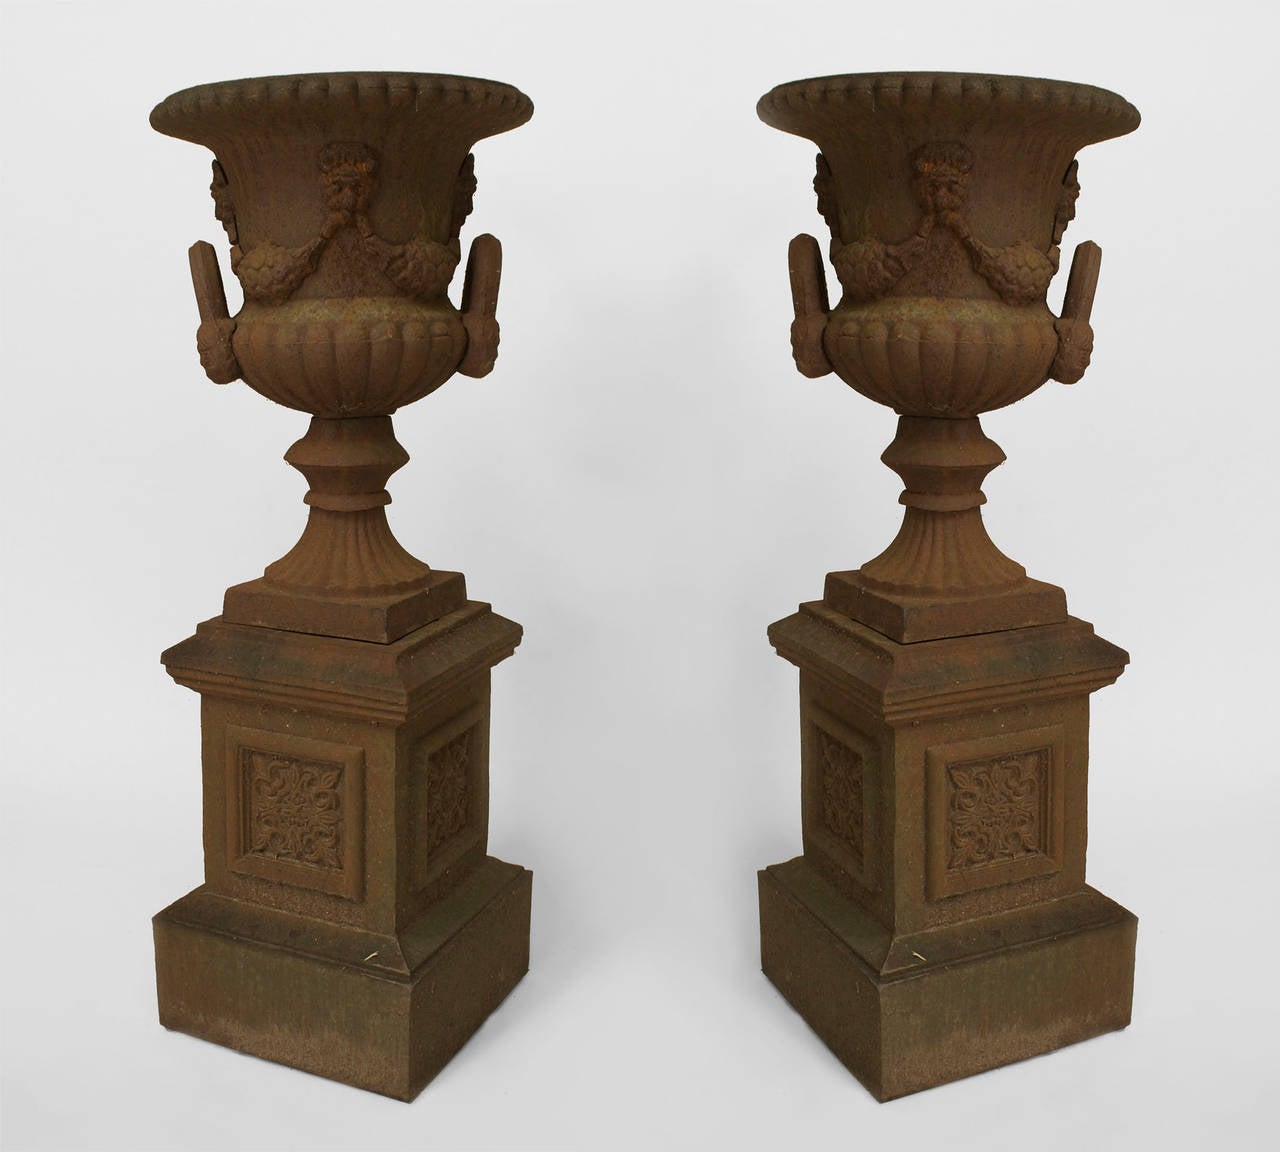 Pair of English Victorian iron urns with festoon design and side handles resting on matching pedestal bases with decorative square panels (Sold AS IS, MISSING PARTS)
